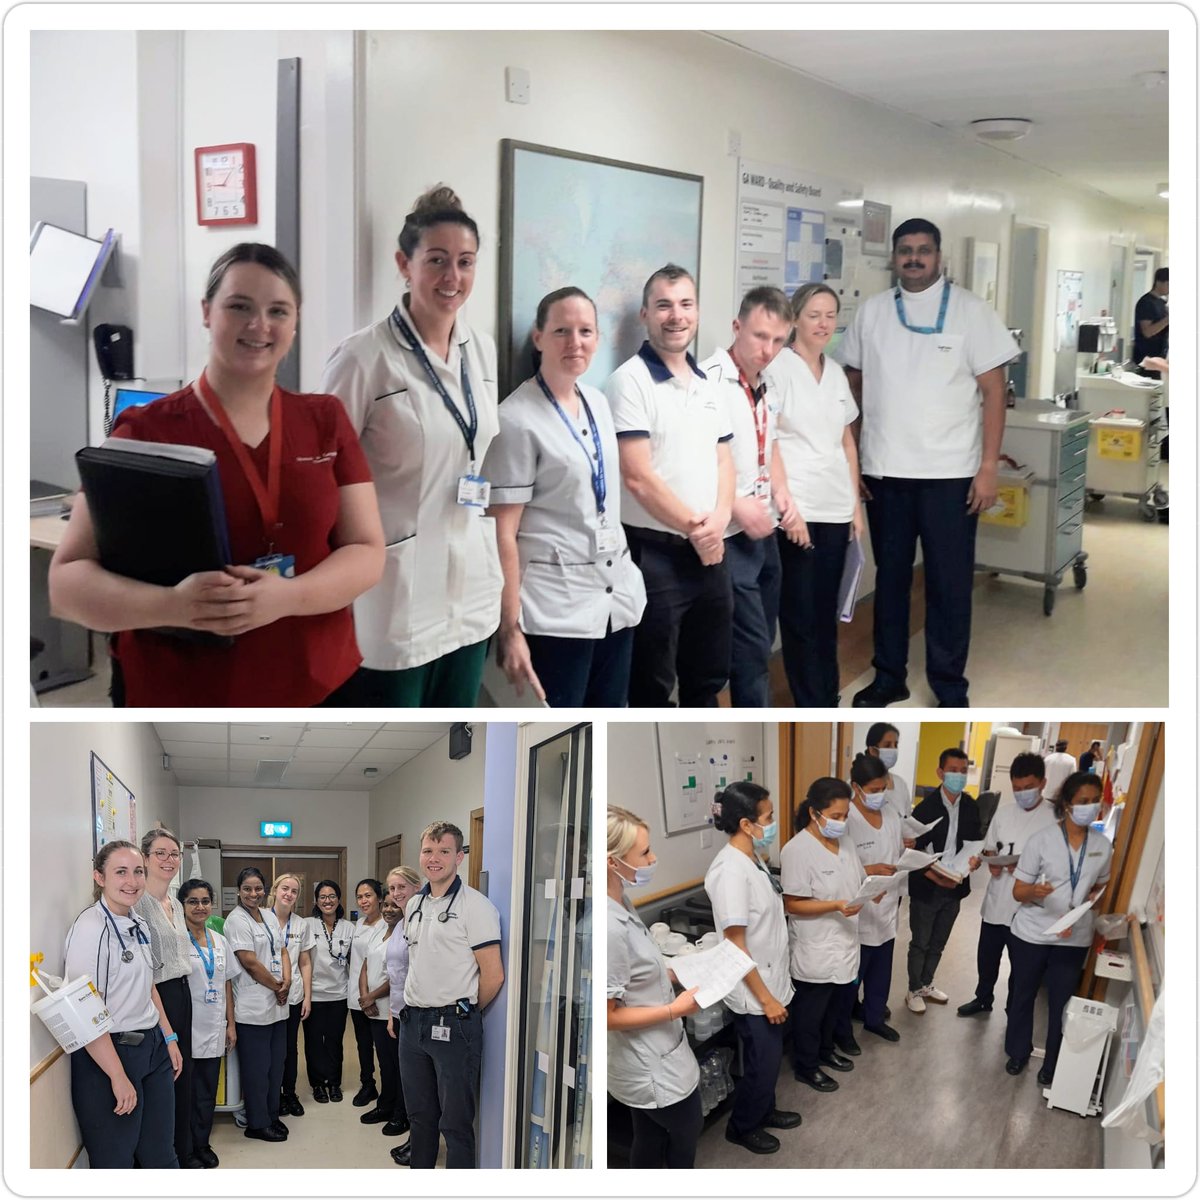 Celebrating World Patient Safety week @CUH_Cork - latest wards to commence safety huddles to mitigate risk, improve interdisciplinary communication & patient outcomes. @NationalQPS @juanitaguidera @johnfitzsimons9 @PeterLachman @mariejacork @AMGalvinCUH @BridAOSullivan